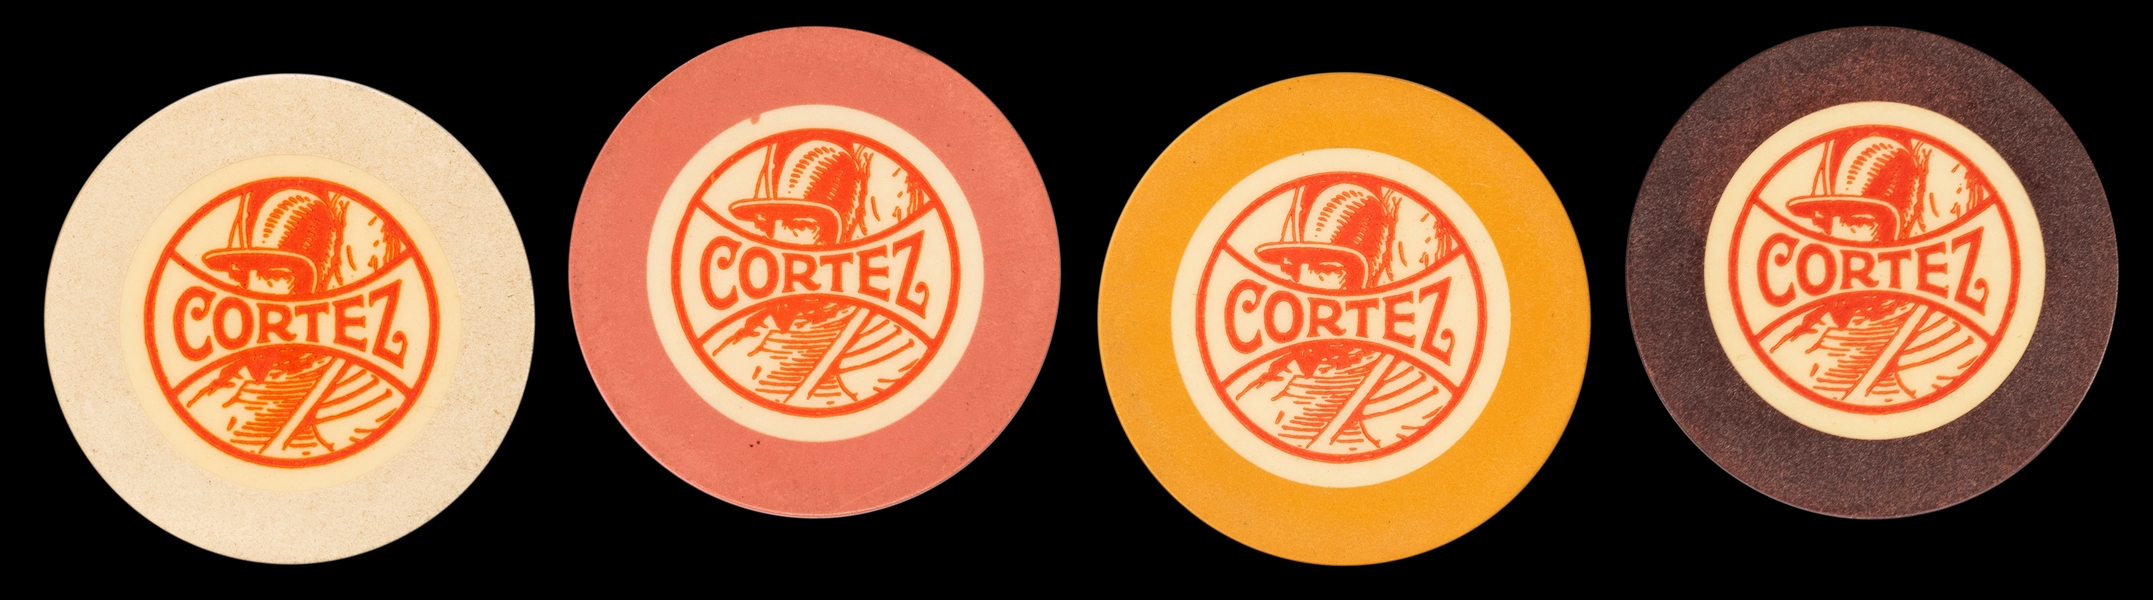  Cortez Club Crest & Seal Chips (3). [Los Angeles, ca. 1920s...